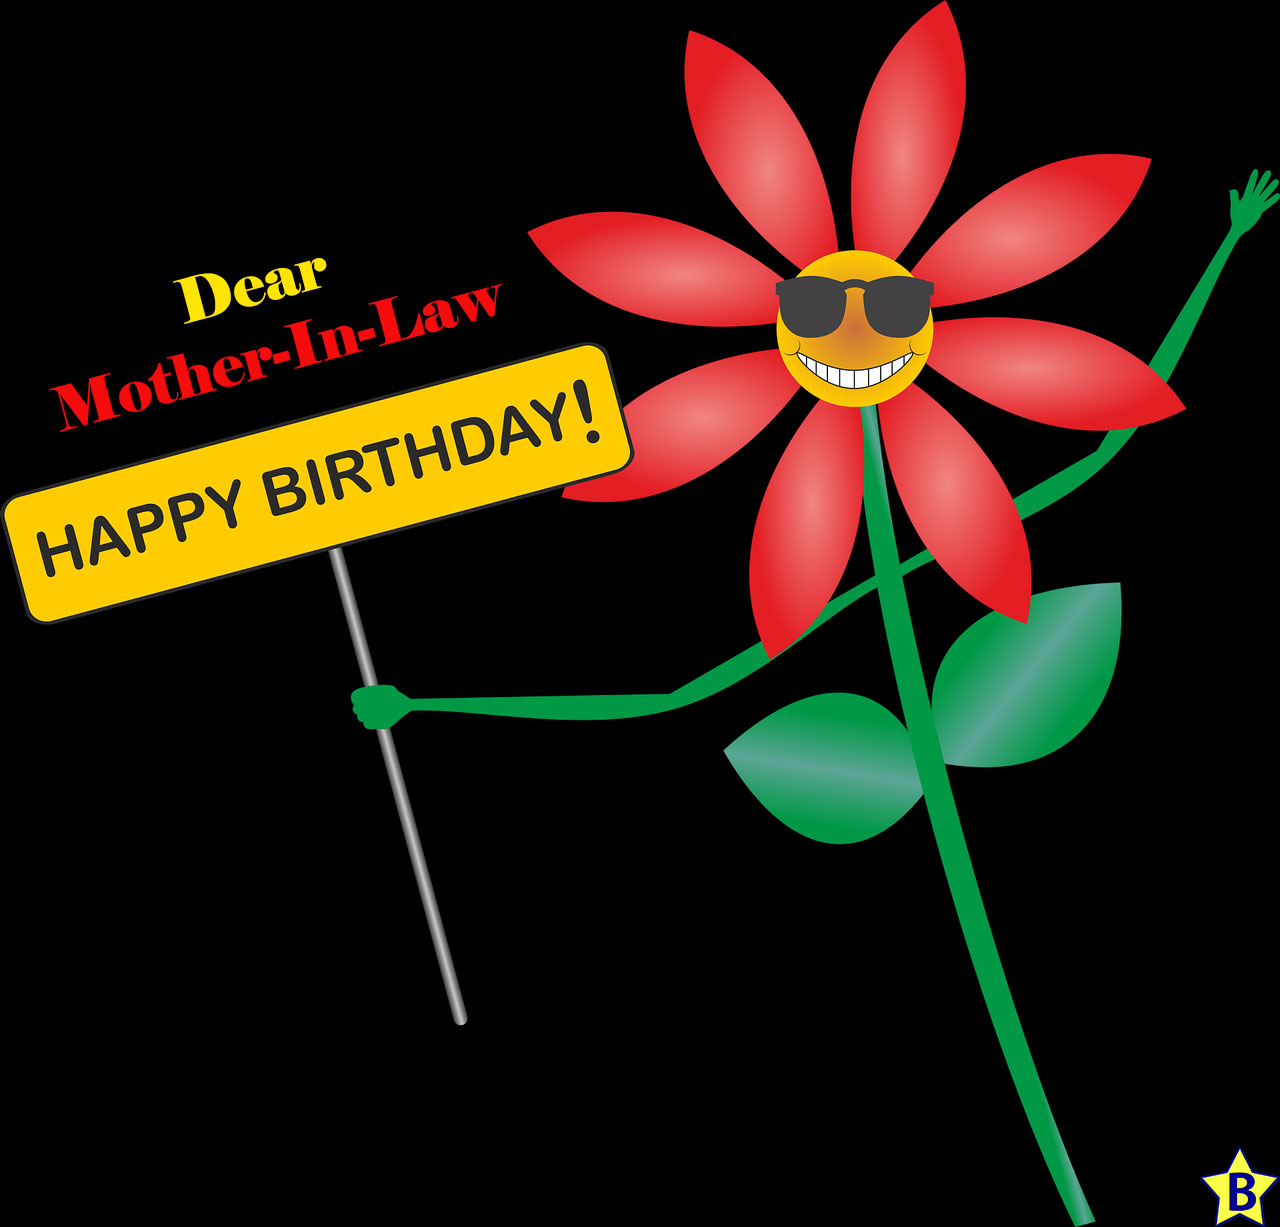 happy birthday mother in law funny images